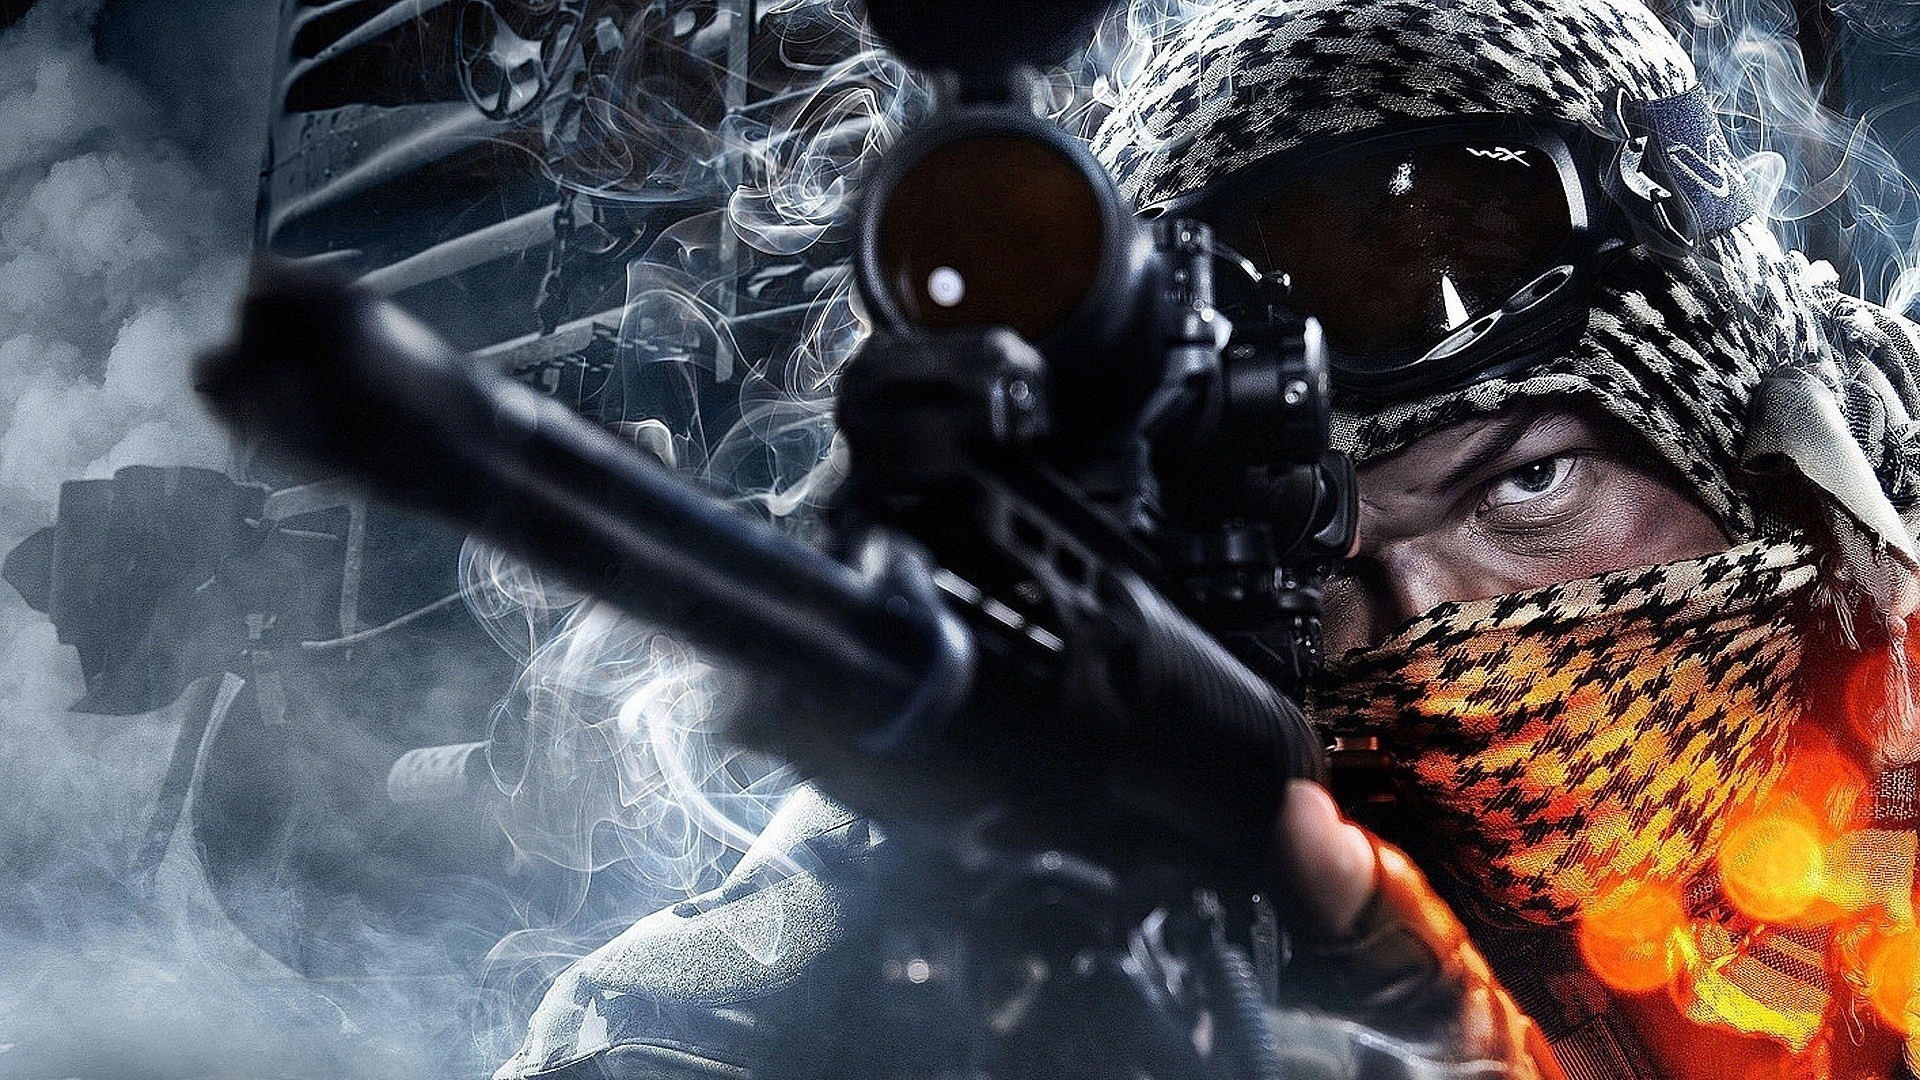 1920x1080 Battlefield 4 Sniper - Wallpapers UK - Backgrounds For all your Devices!